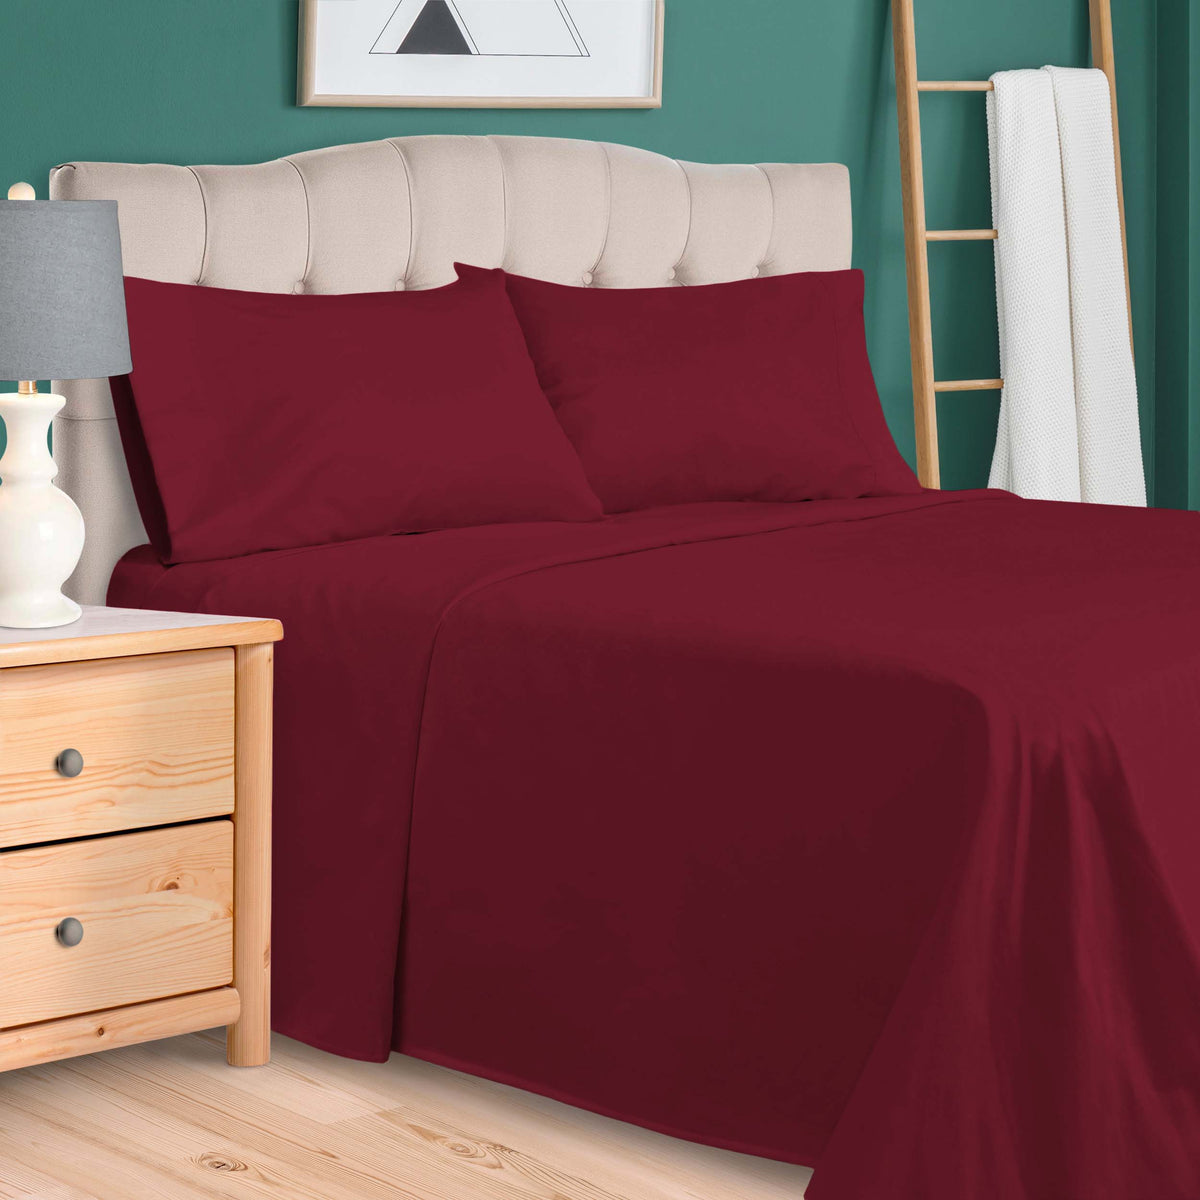 Egyptian Cotton 700 Thread Count Eco Friendly Solid Sheet Set - Burgundy